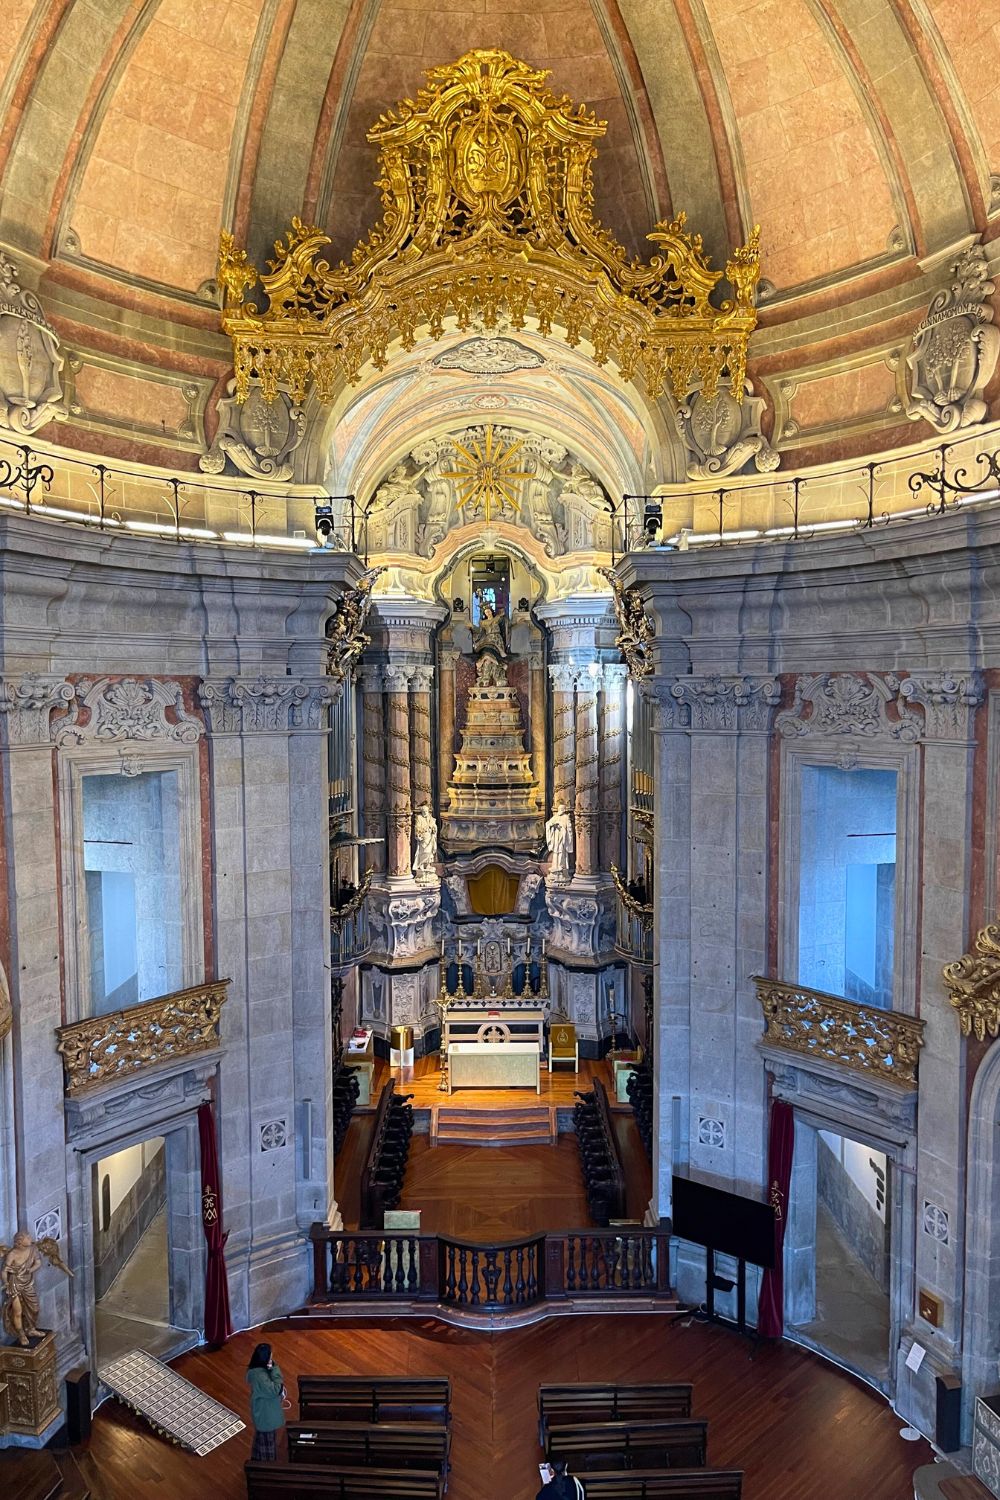 Interior view of a Porto church showing the elaborate gold leaf baroque altar, ornate woodwork, and grand arches, as seen from the upper-level balcony.